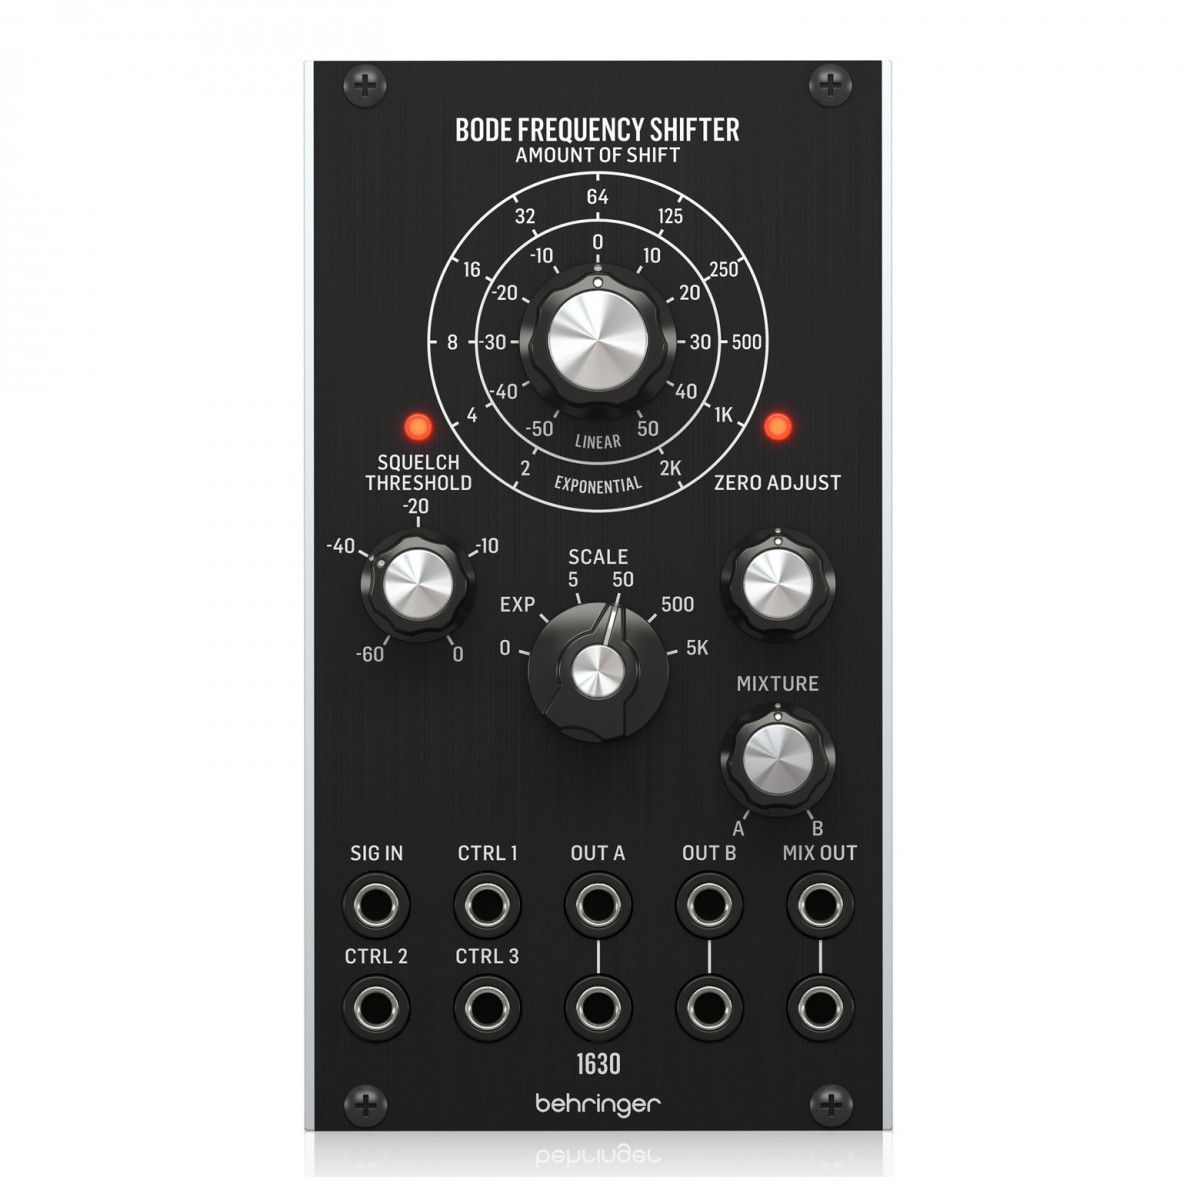 BEHRINGER BODE FREQUENCY SHIFTER 1630 MODULO ANALOGICO PER EURORACK 1